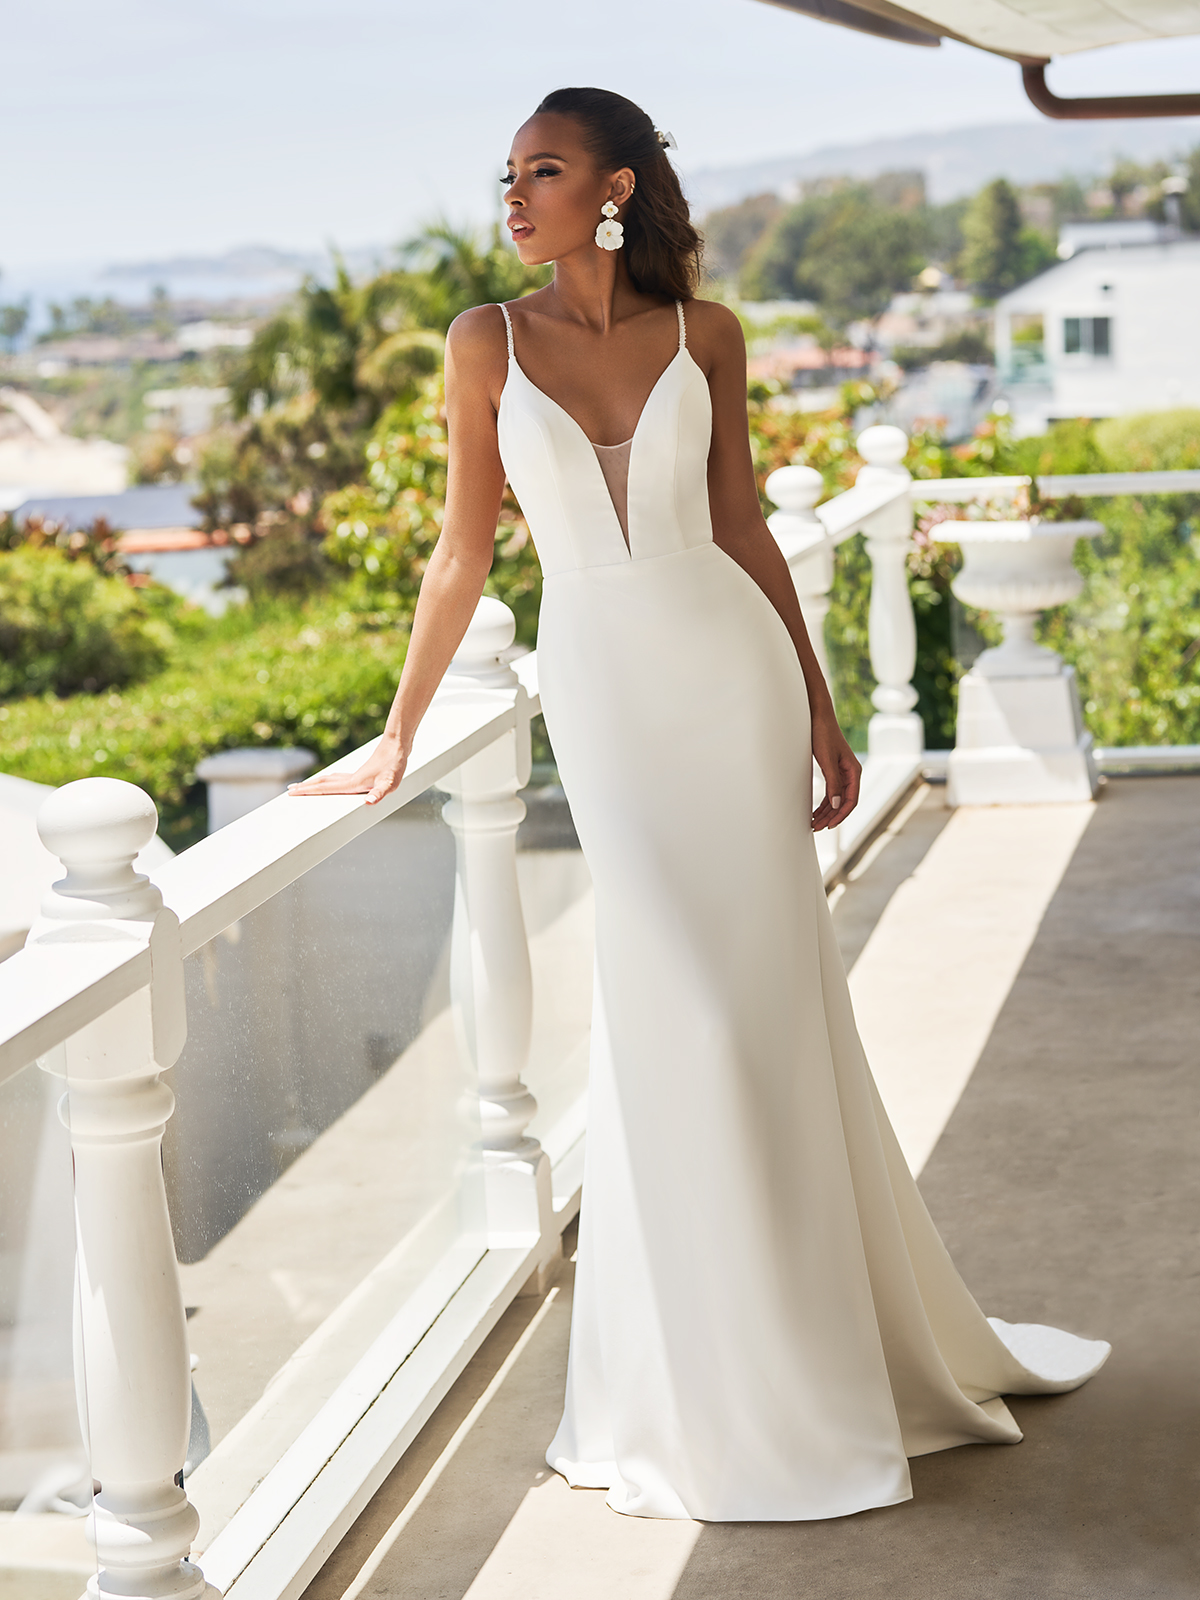 What Are The Best Wedding Dresses That Look Fabulous with Flats?